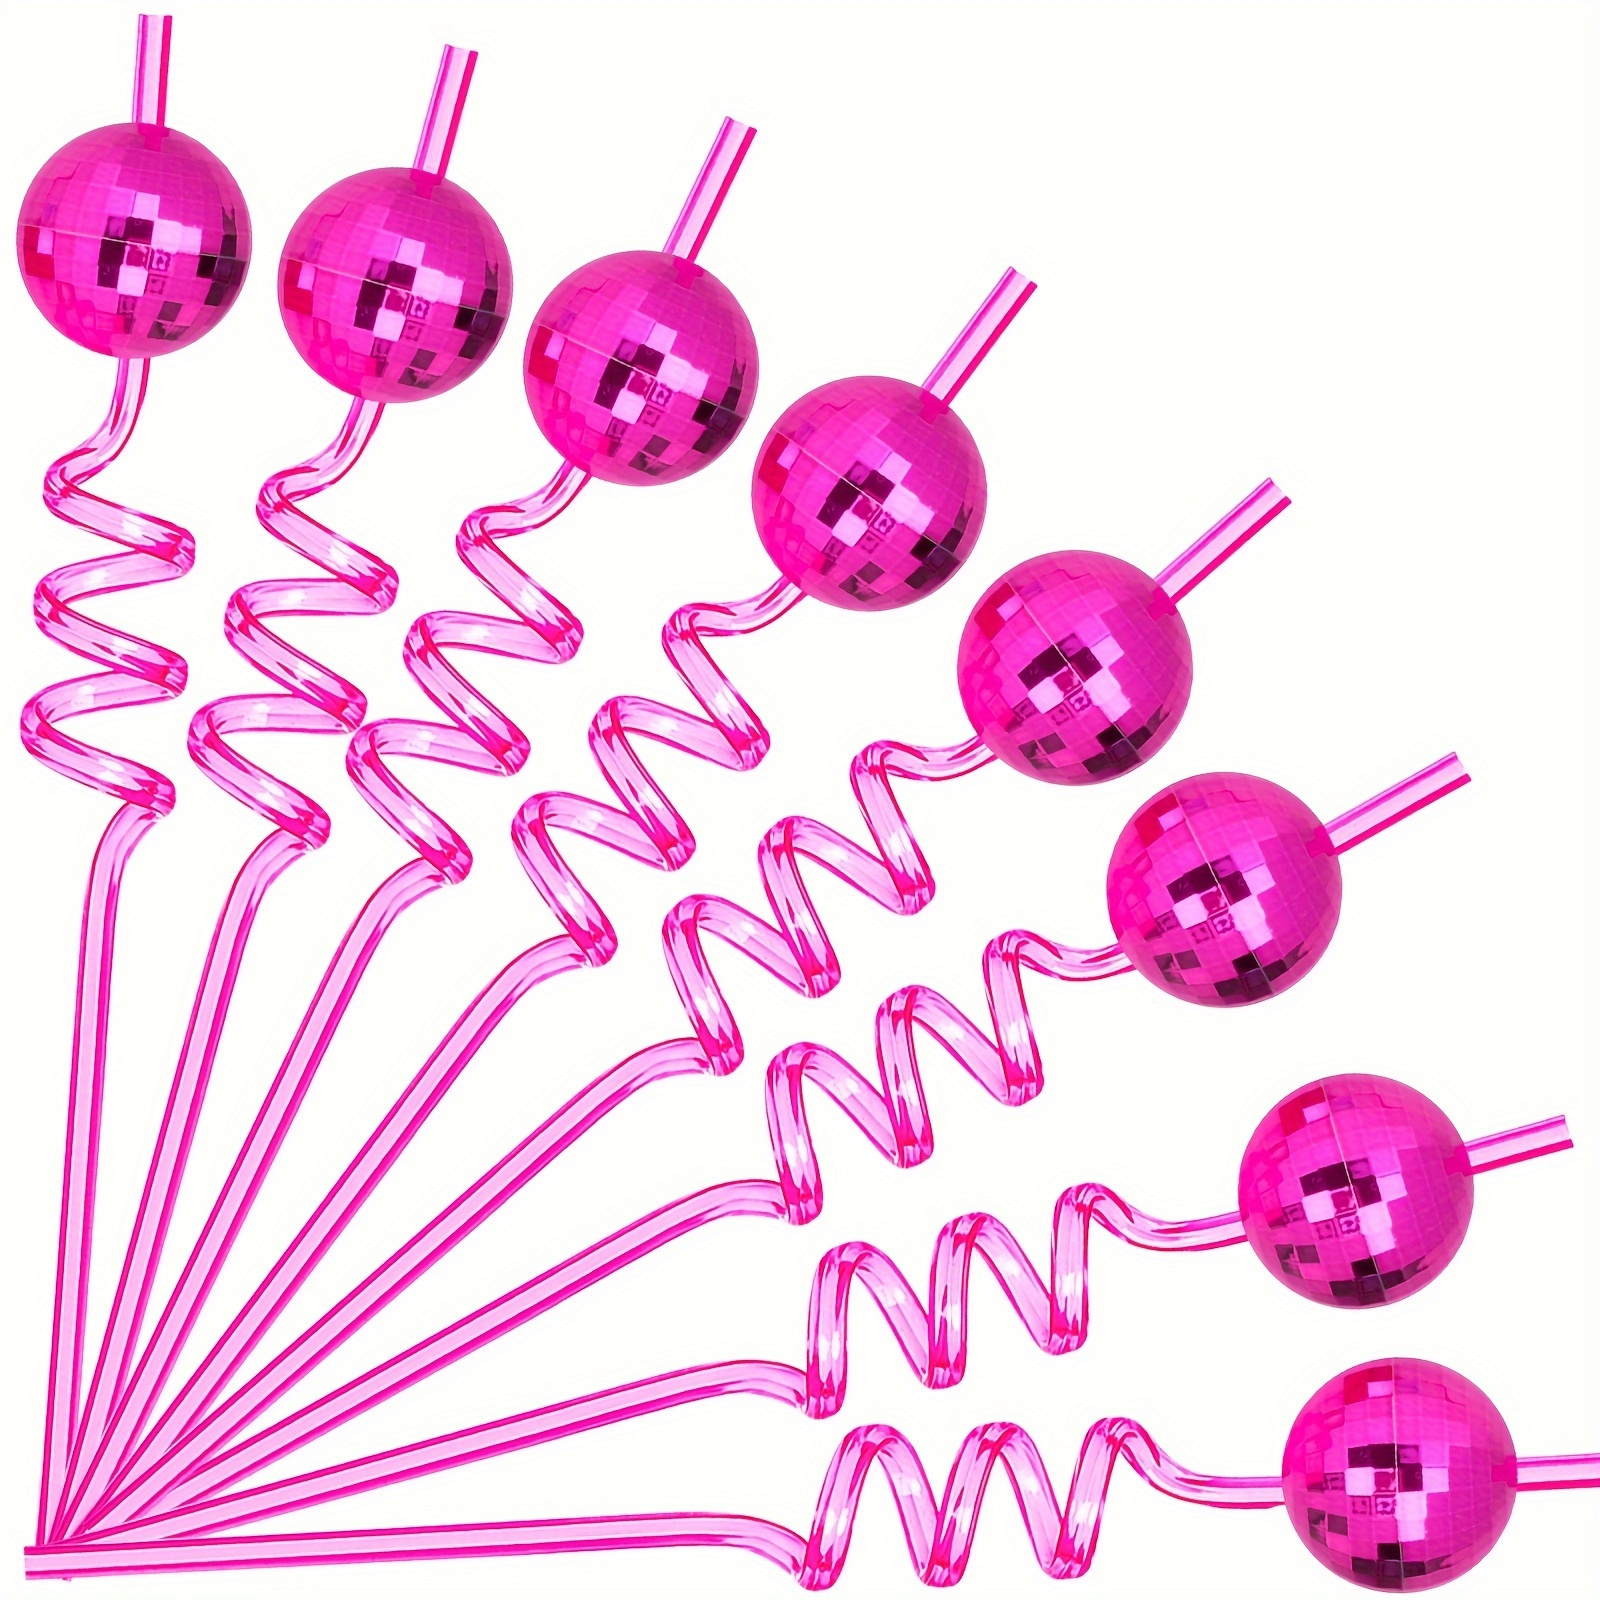 

Pink Disco Ball Reusable Swirly Straw Set - 12pcs Groovy Birthday Party Supplies, Last Disco Bachelorette Decorations, Space Cowboy Favors